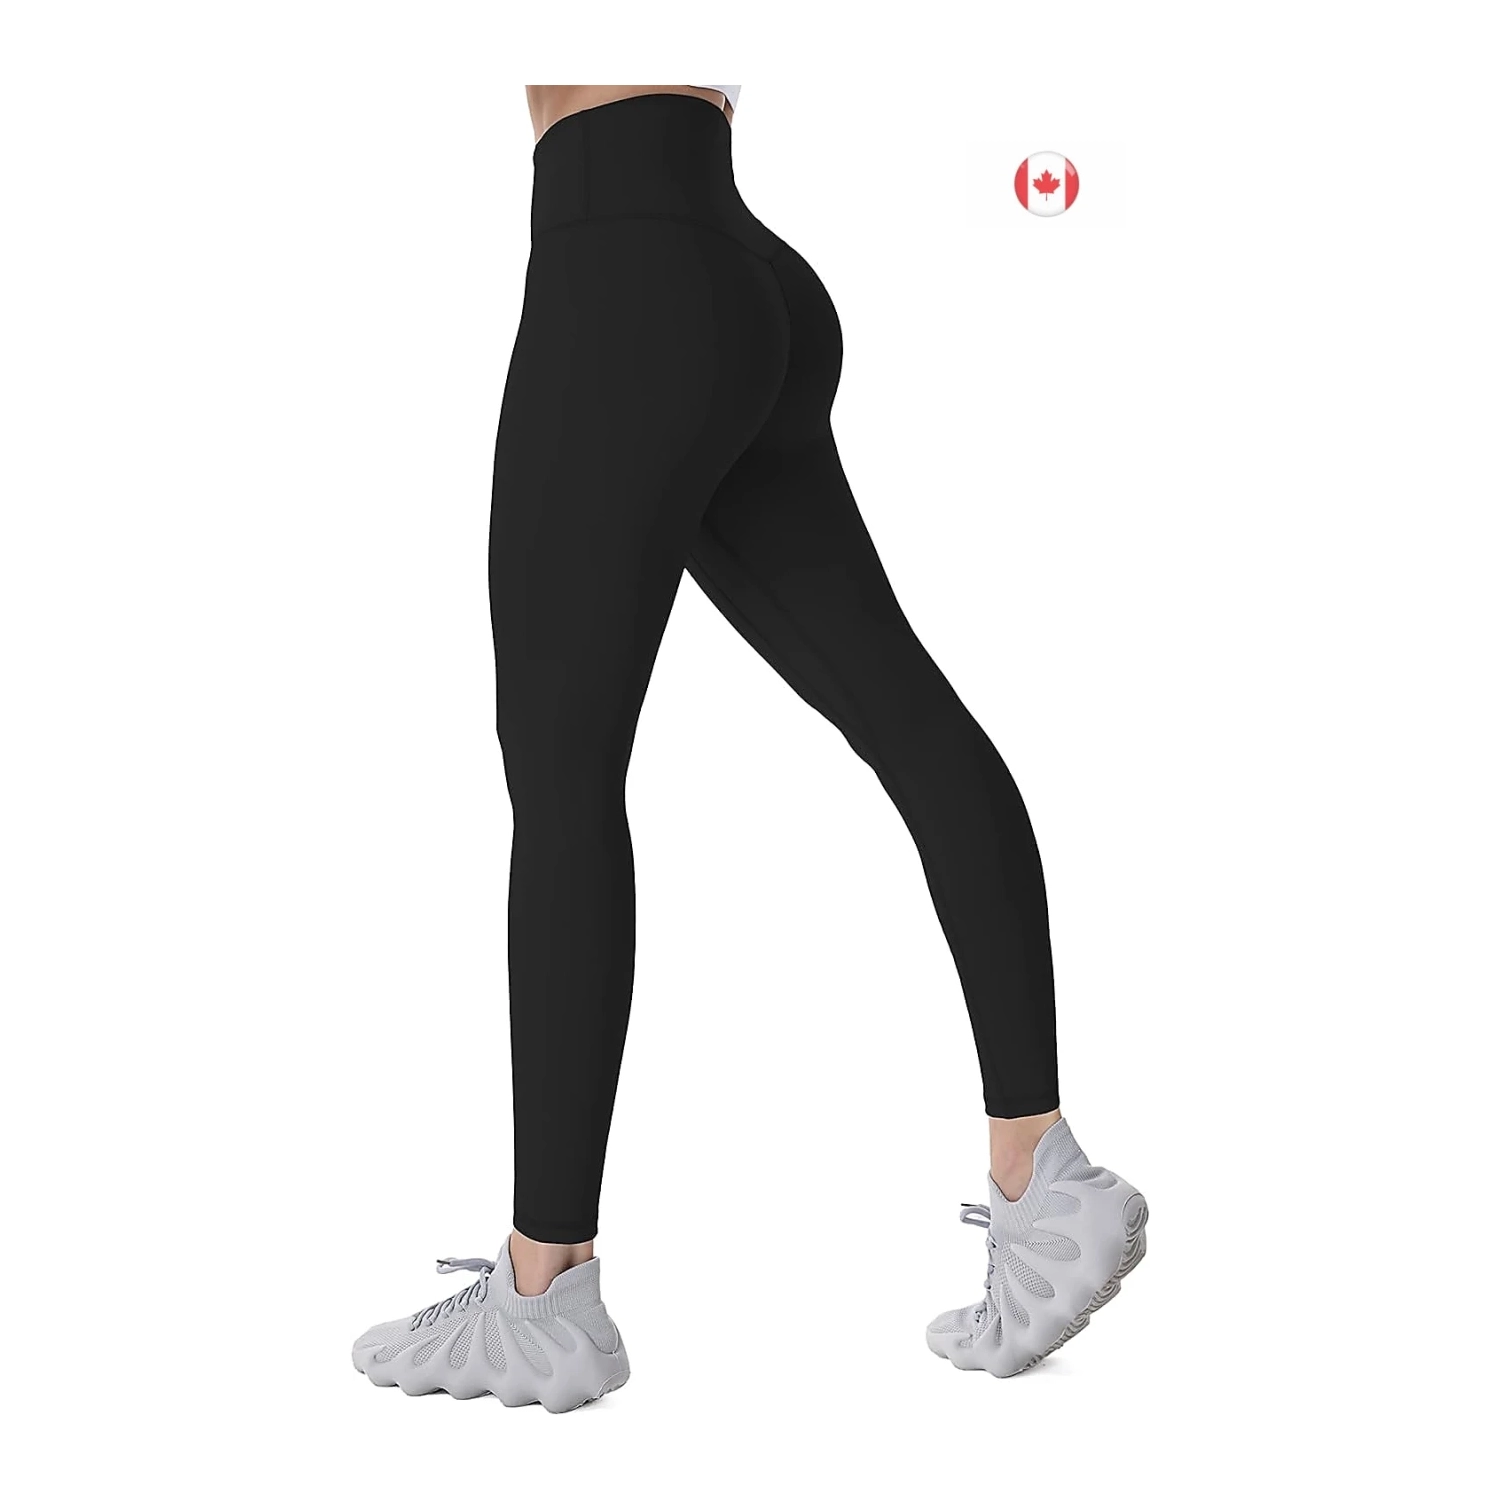 Sunzel Workout Leggings for Women, Squat Proof High Waisted Yoga Pants 4  Way Stretch, Buttery Soft, offered by  - APPAREL